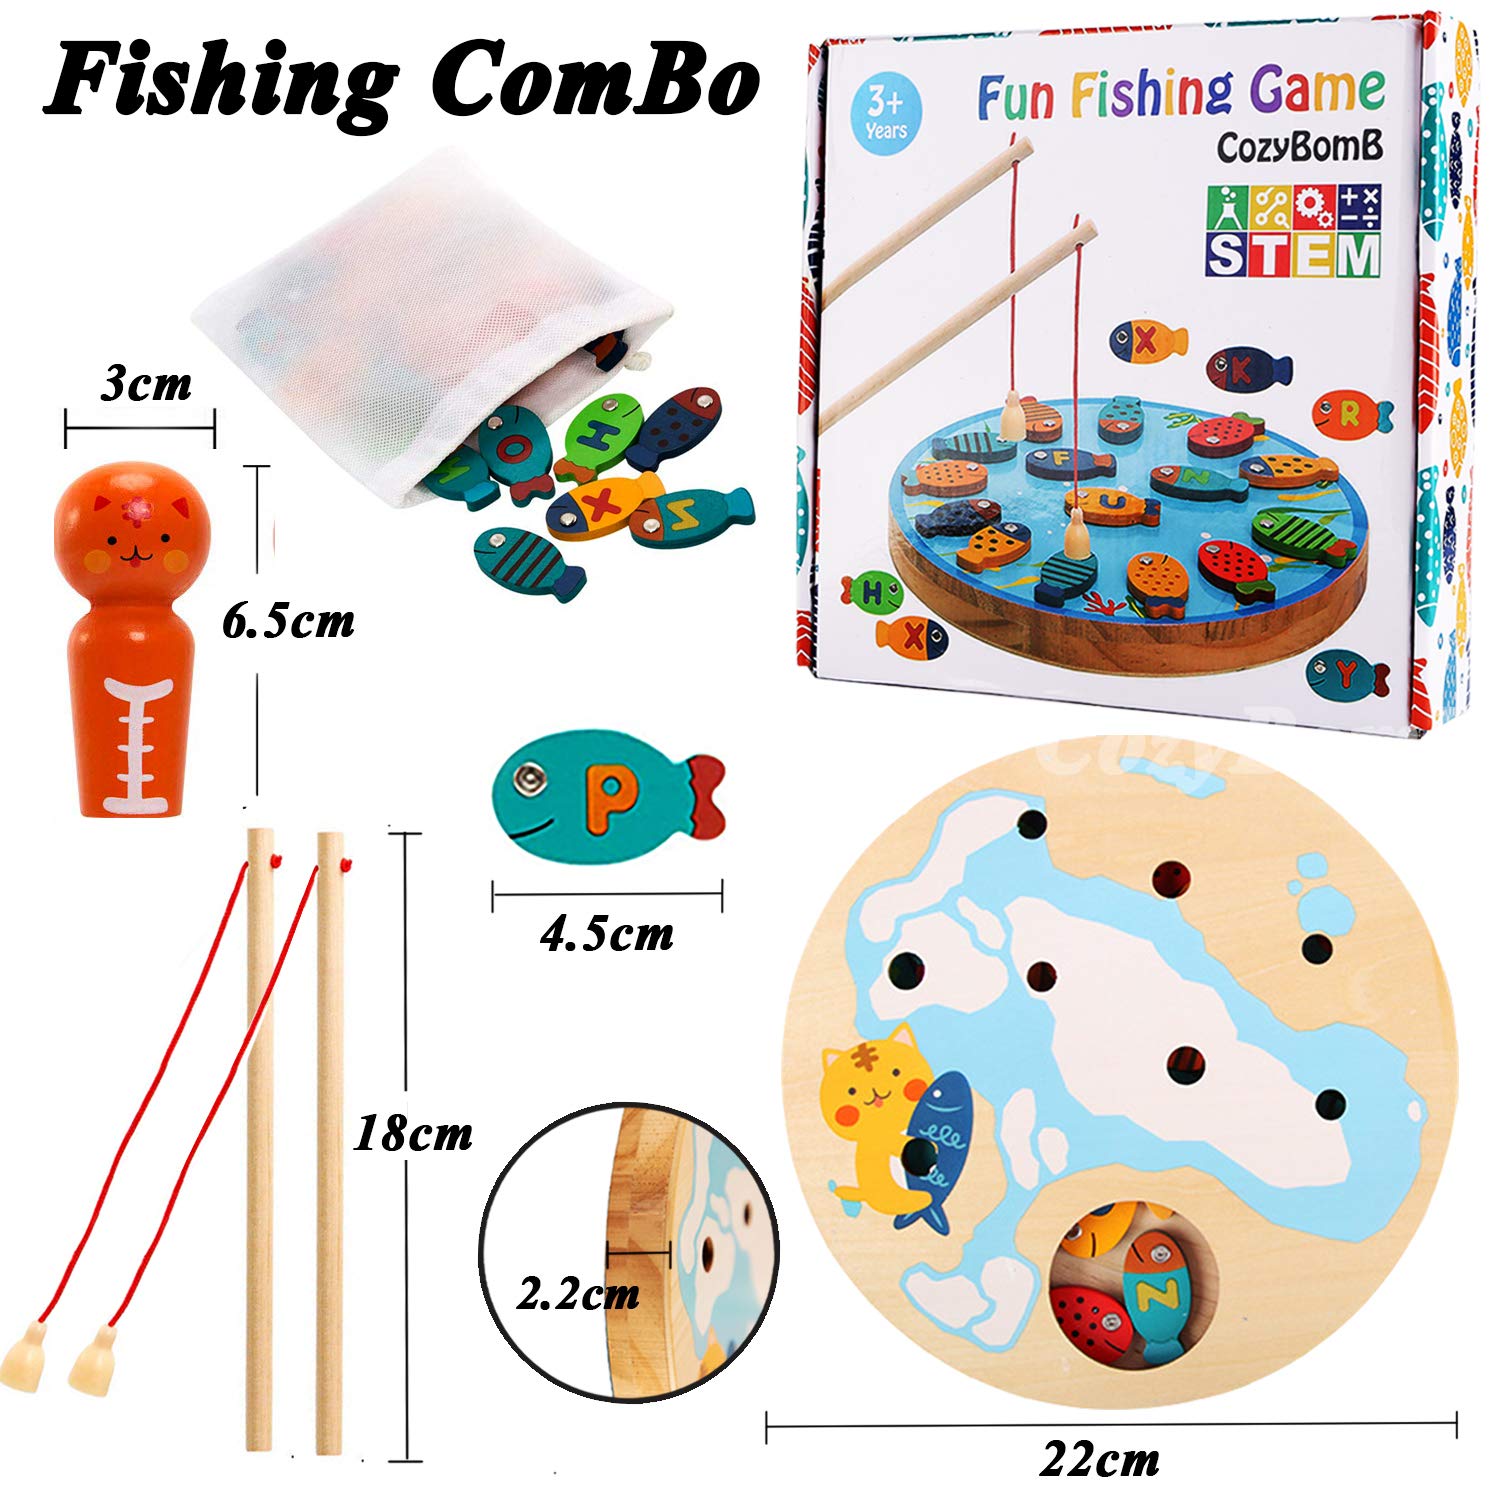 Check out this Magnetic Fishing STEM activity you can do at home!